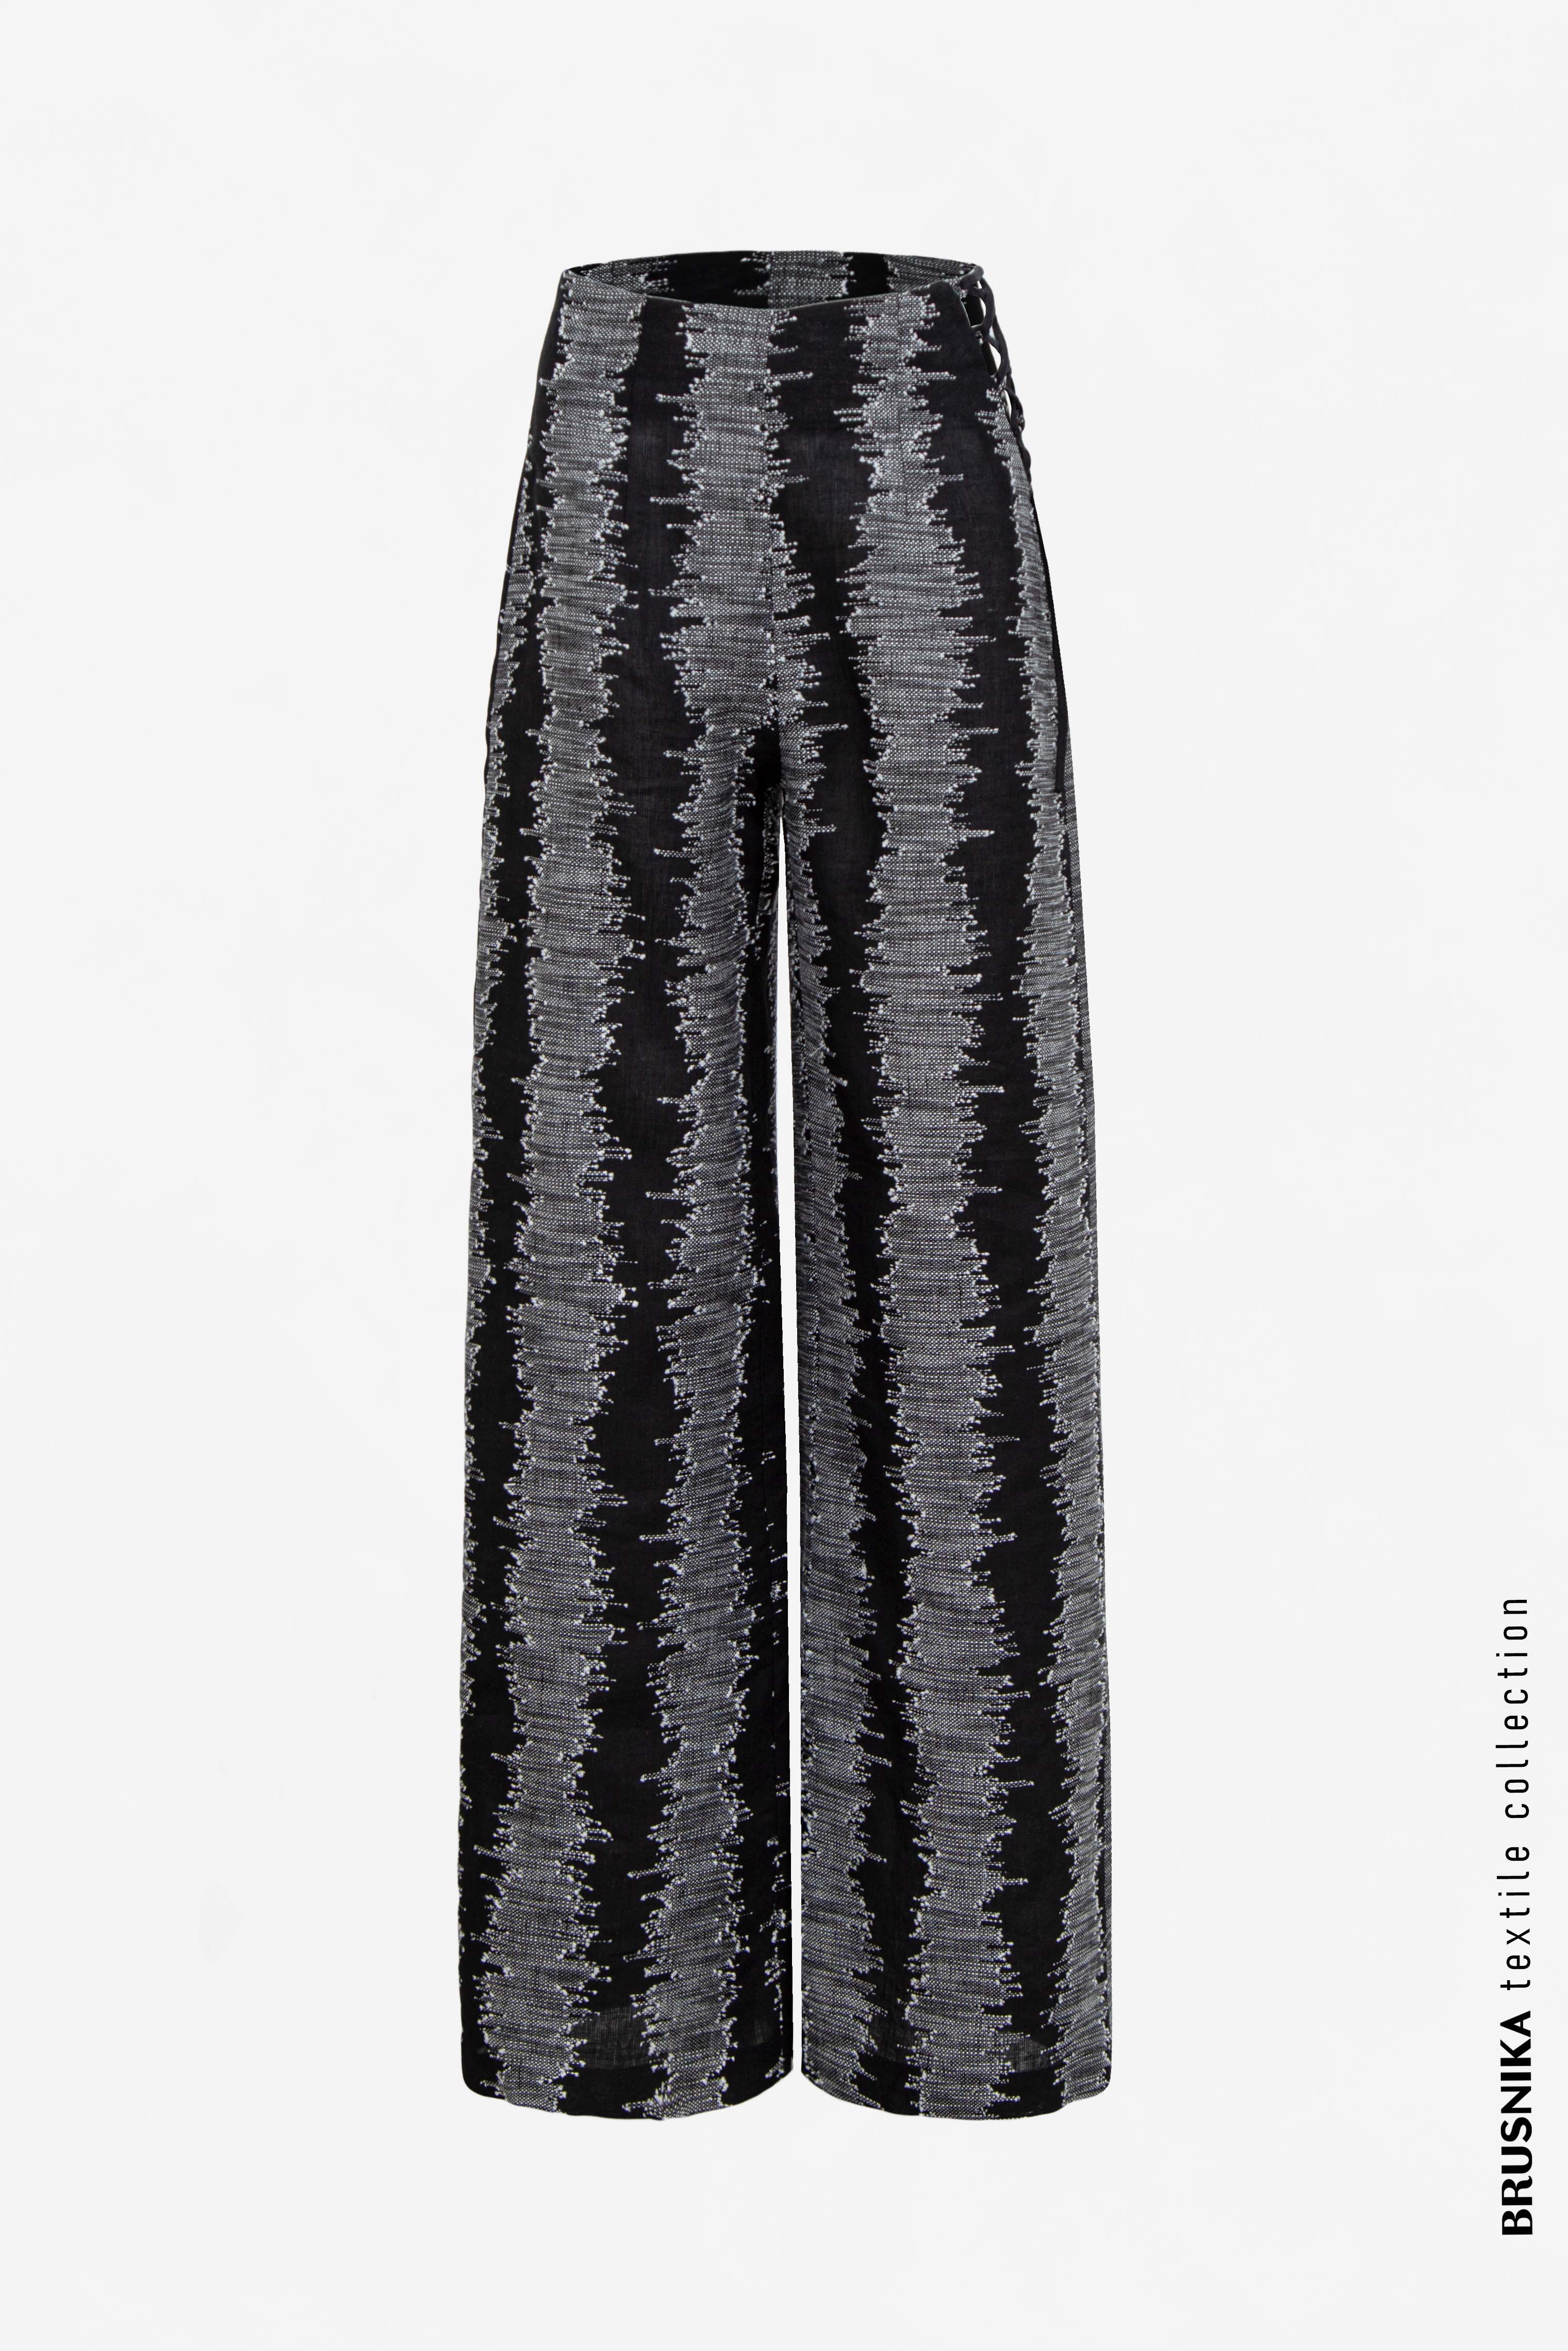 Trousers 4032-01 Black from BRUSNiKA